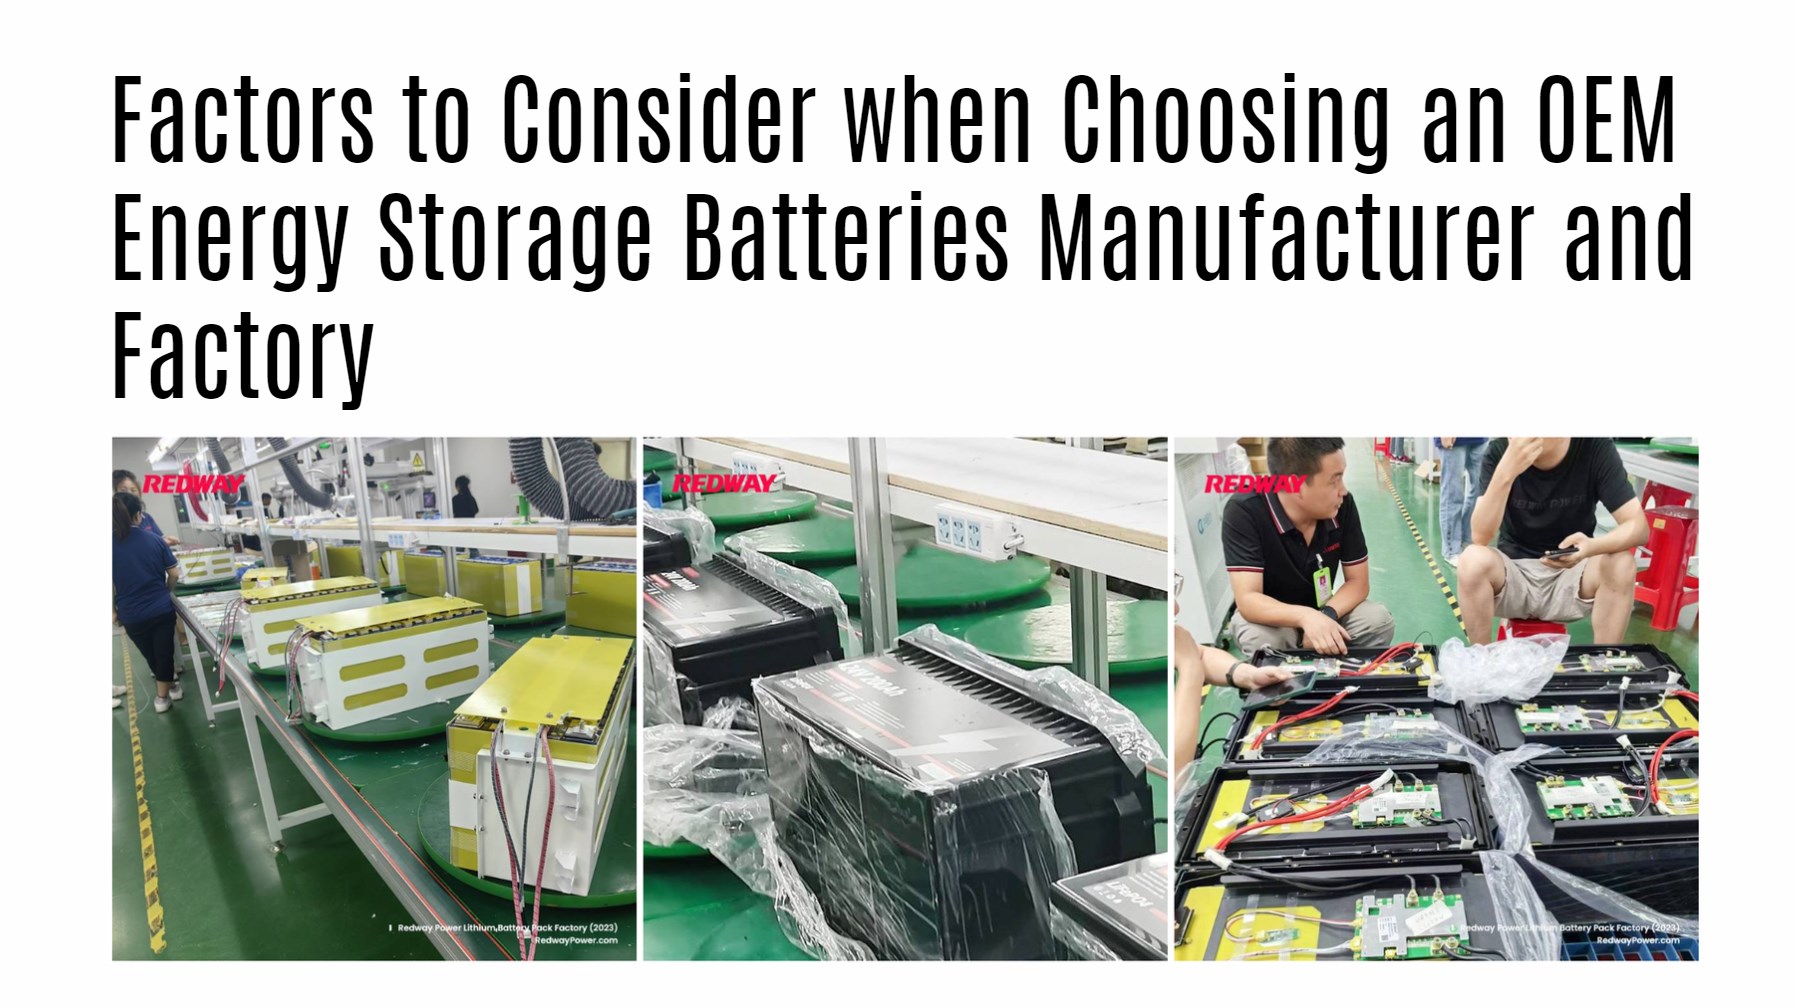 Factors to Consider when Choosing an OEM Energy Storage Batteries Manufacturer and Factory